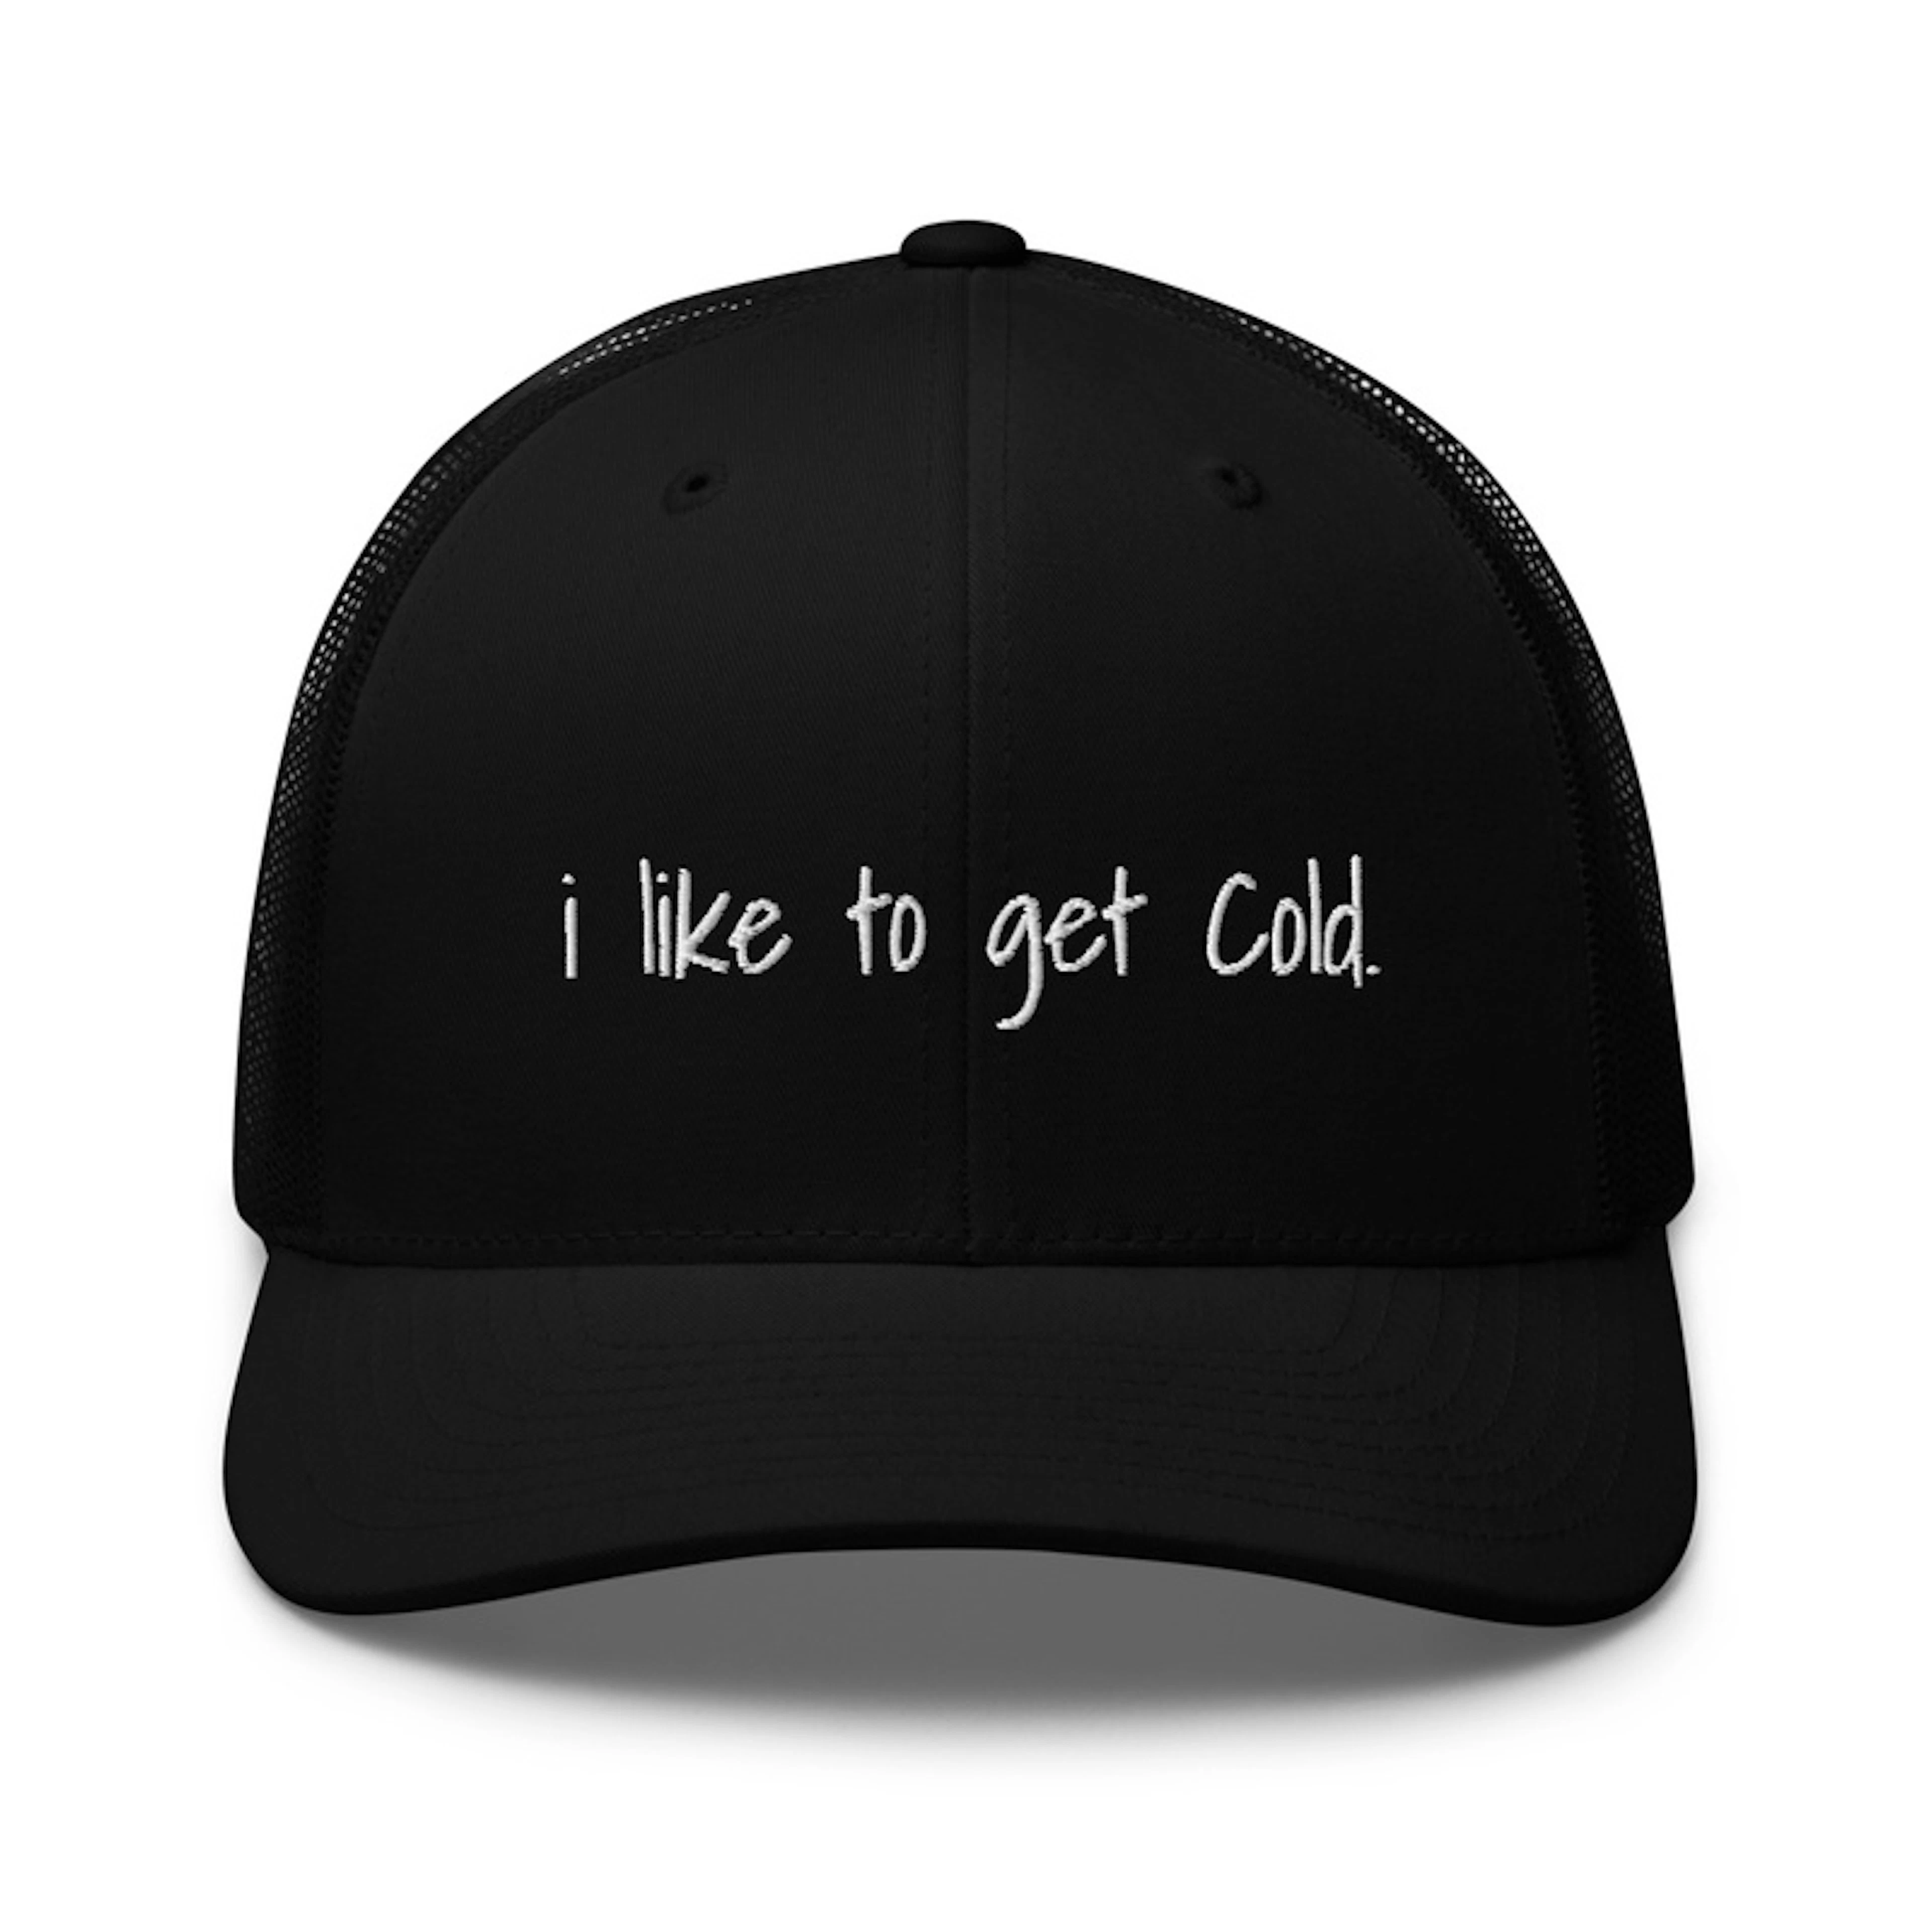 i like to get cold. Hat